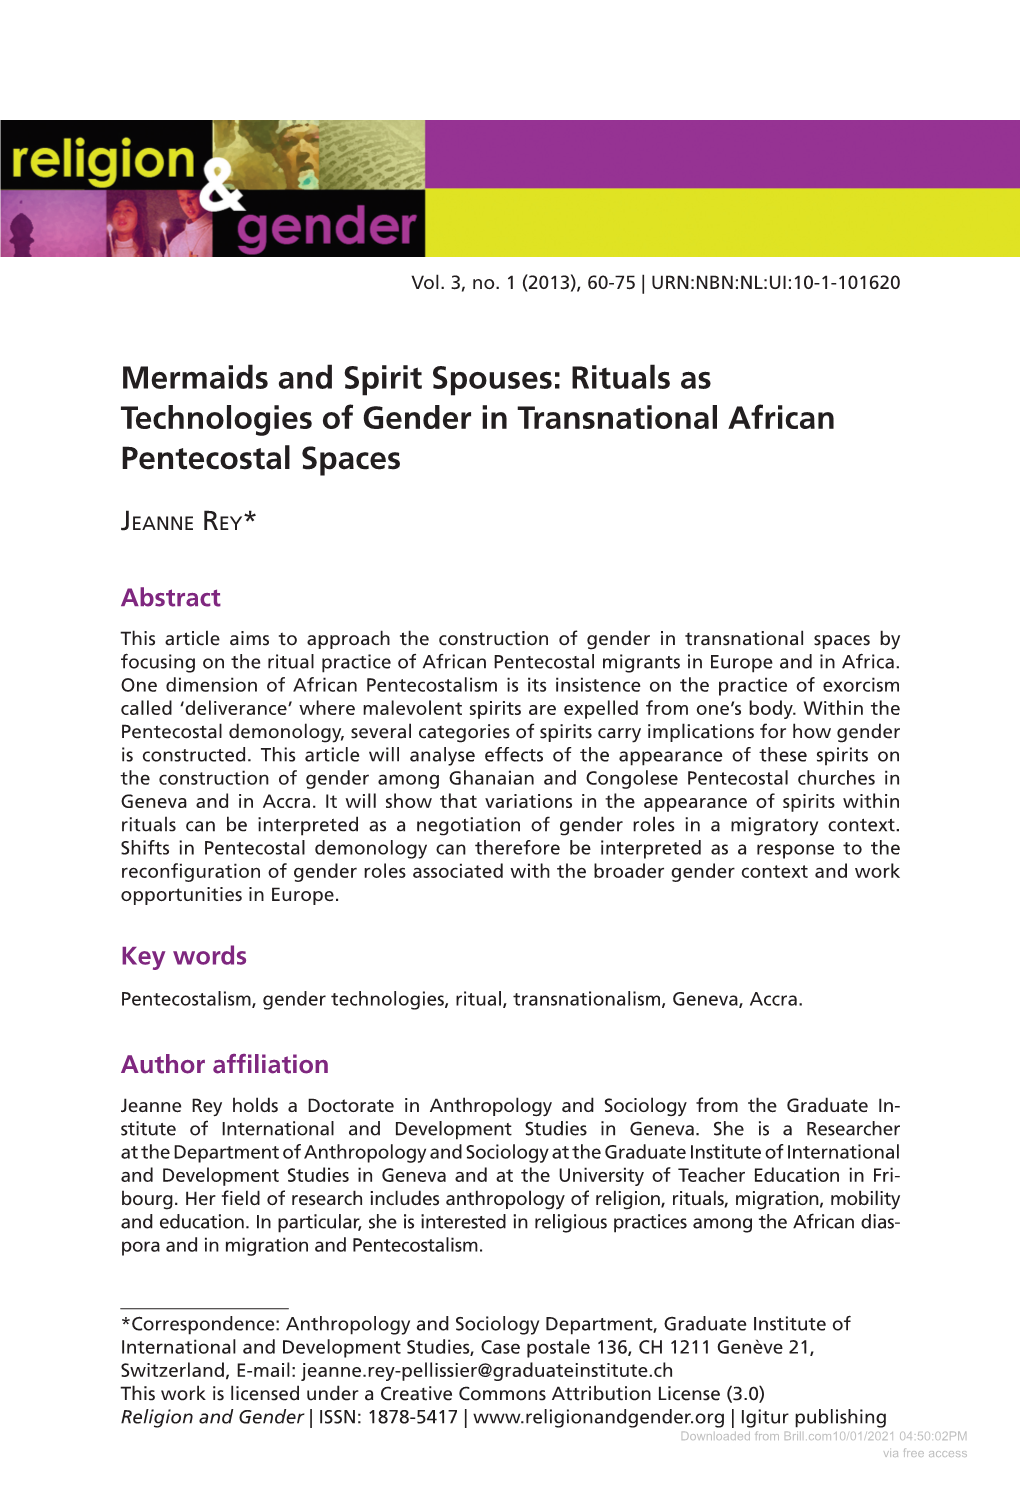 Mermaids and Spirit Spouses: Rituals As Technologies of Gender in Transnational African Pentecostal Spaces